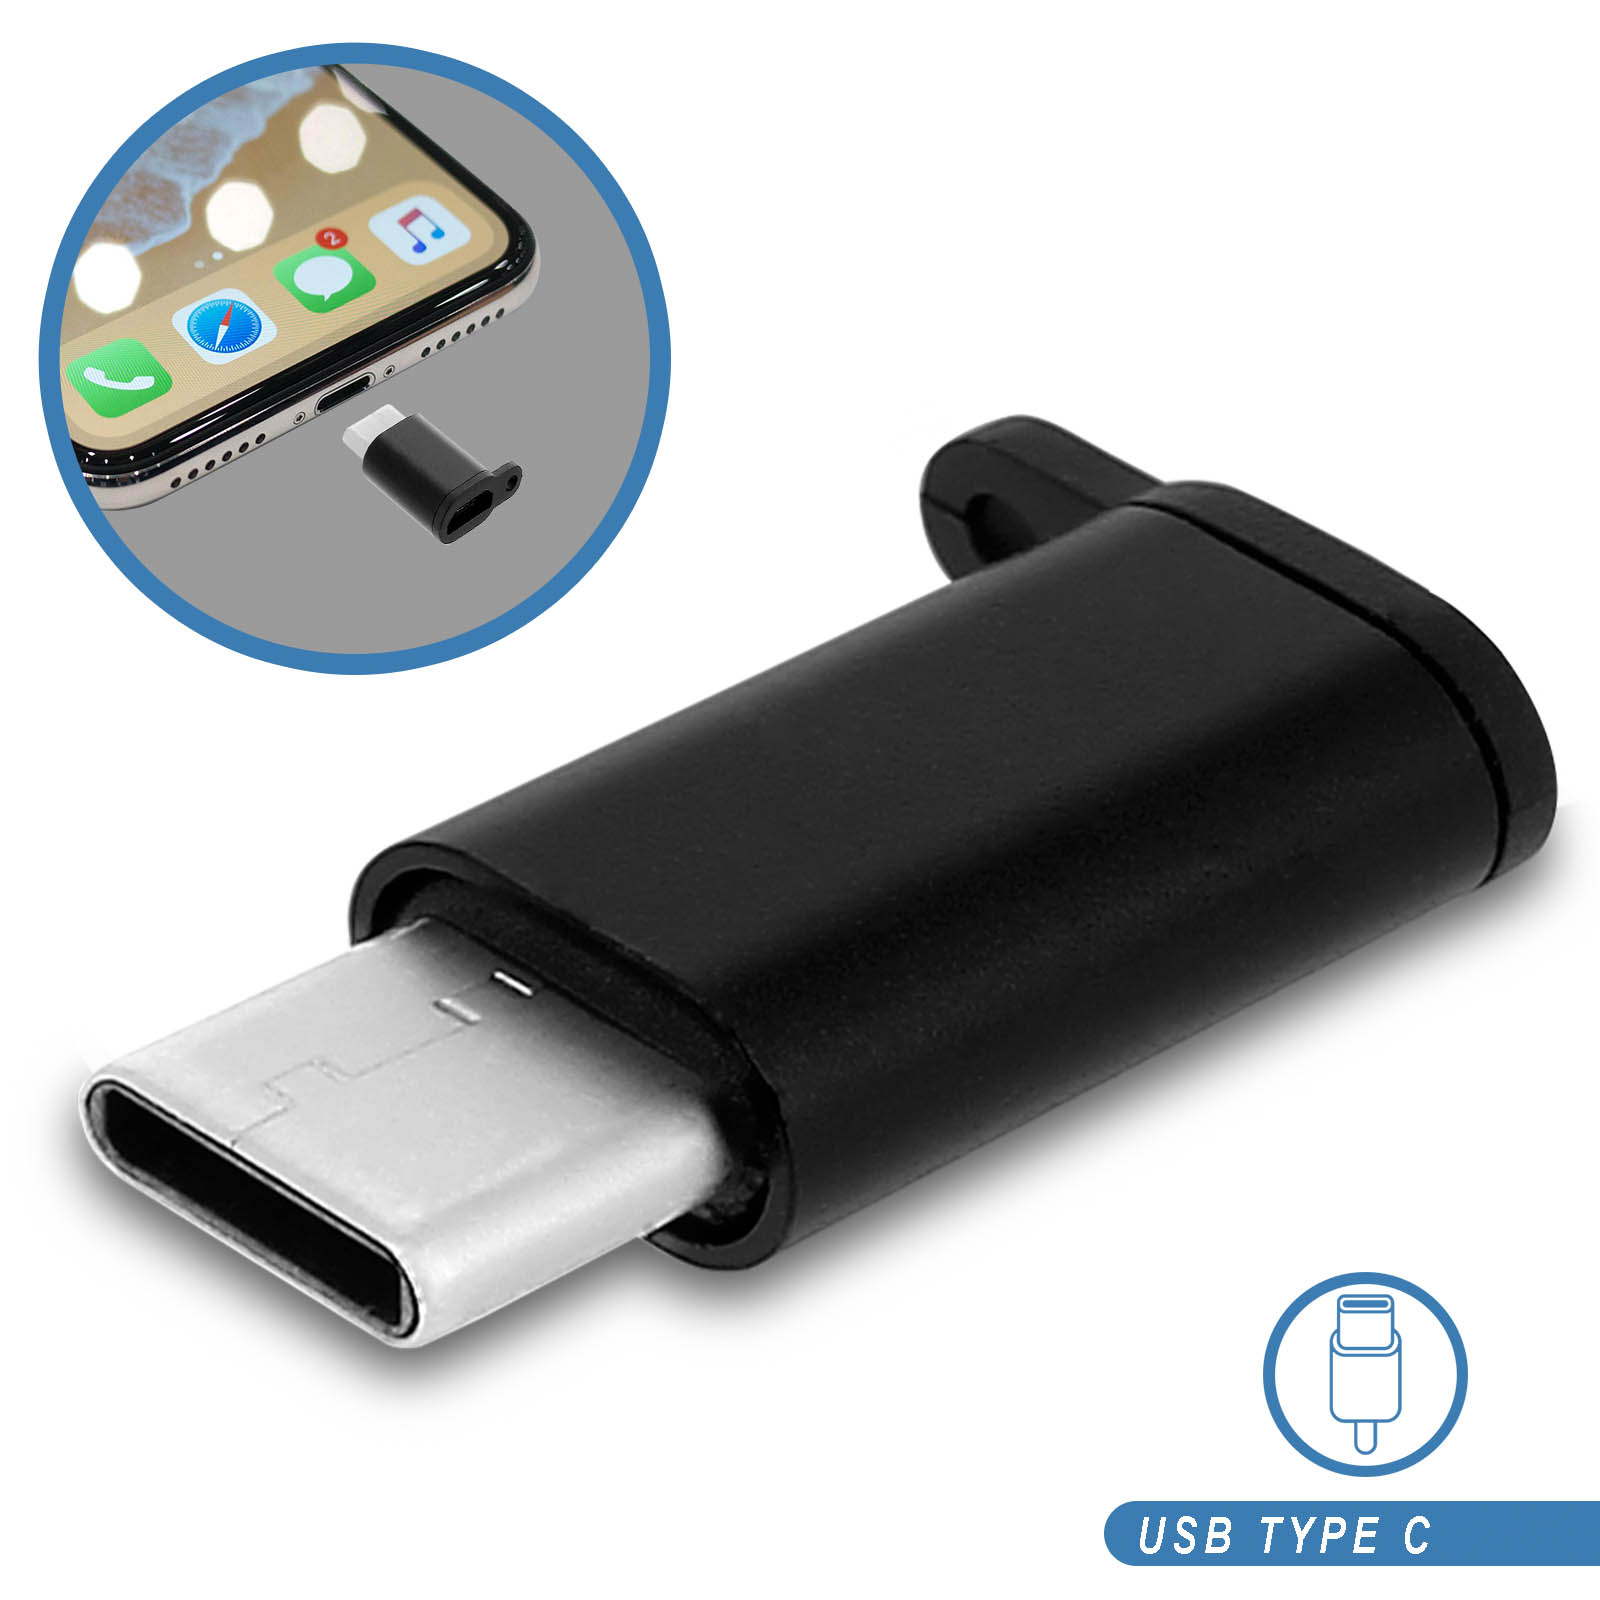 Adaptateur Charge et Synchronisation, USB Type C vers Micro USB